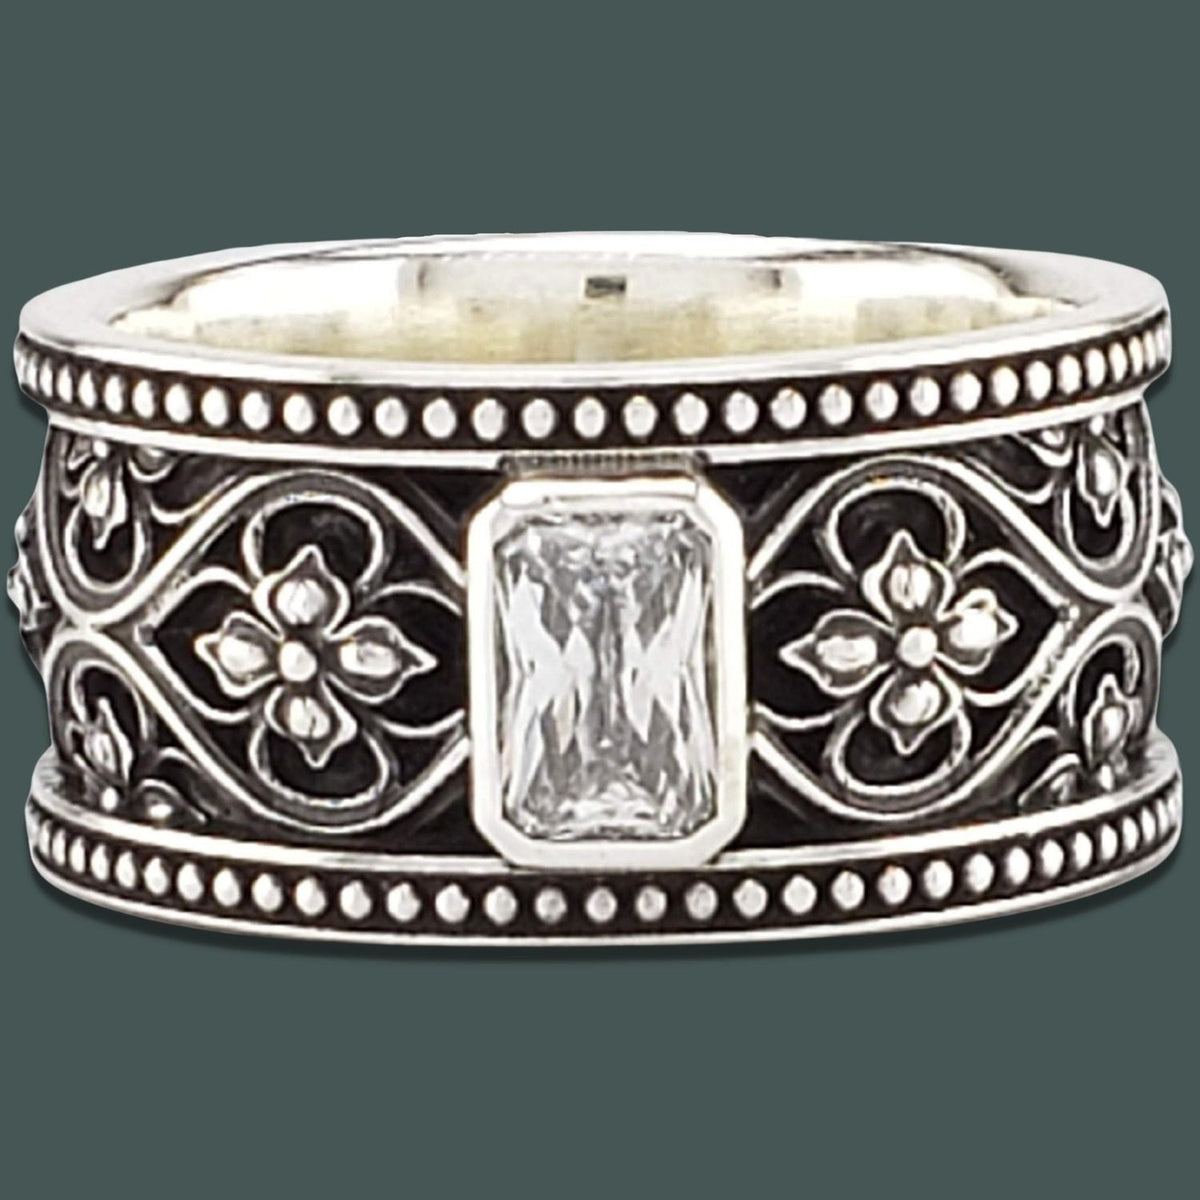 VALENCIA SOLITAIRE Band Ring in SILVER with CHOICE OF 5mm GEMSTONE - Starting at $249 - Celtic Jewelscapes